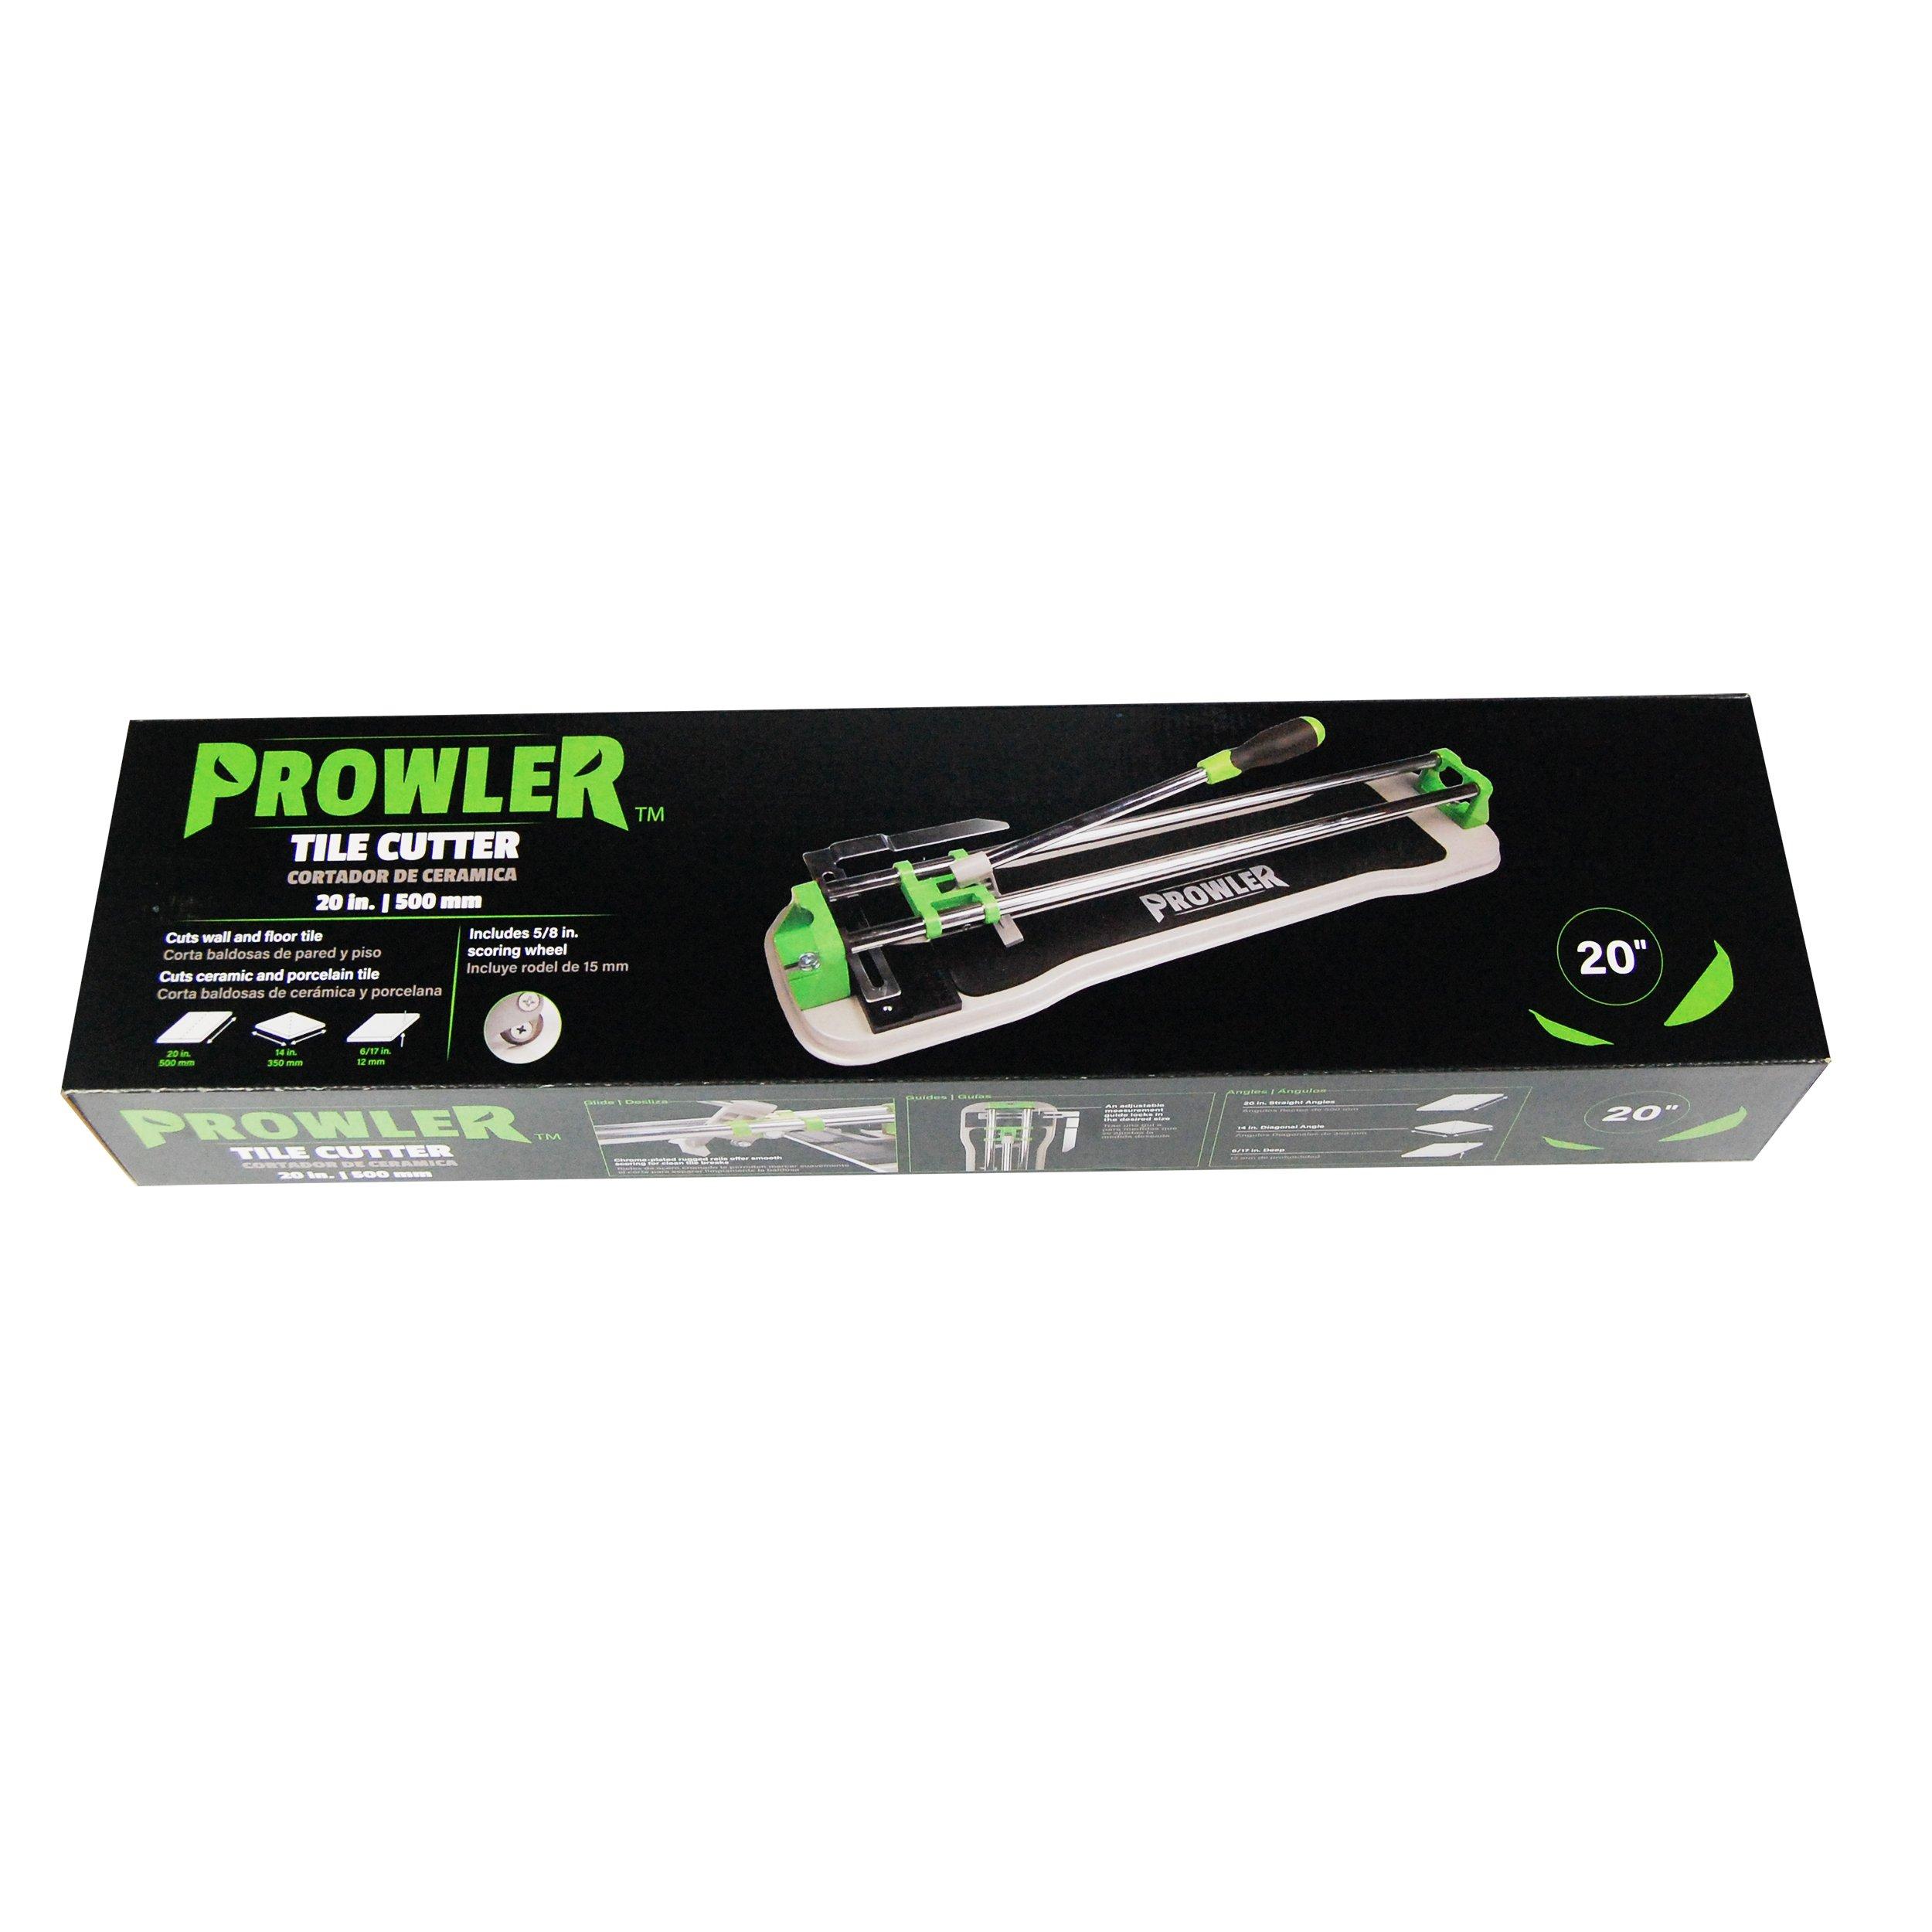 Prowler 20in. Manual Tile Cutter